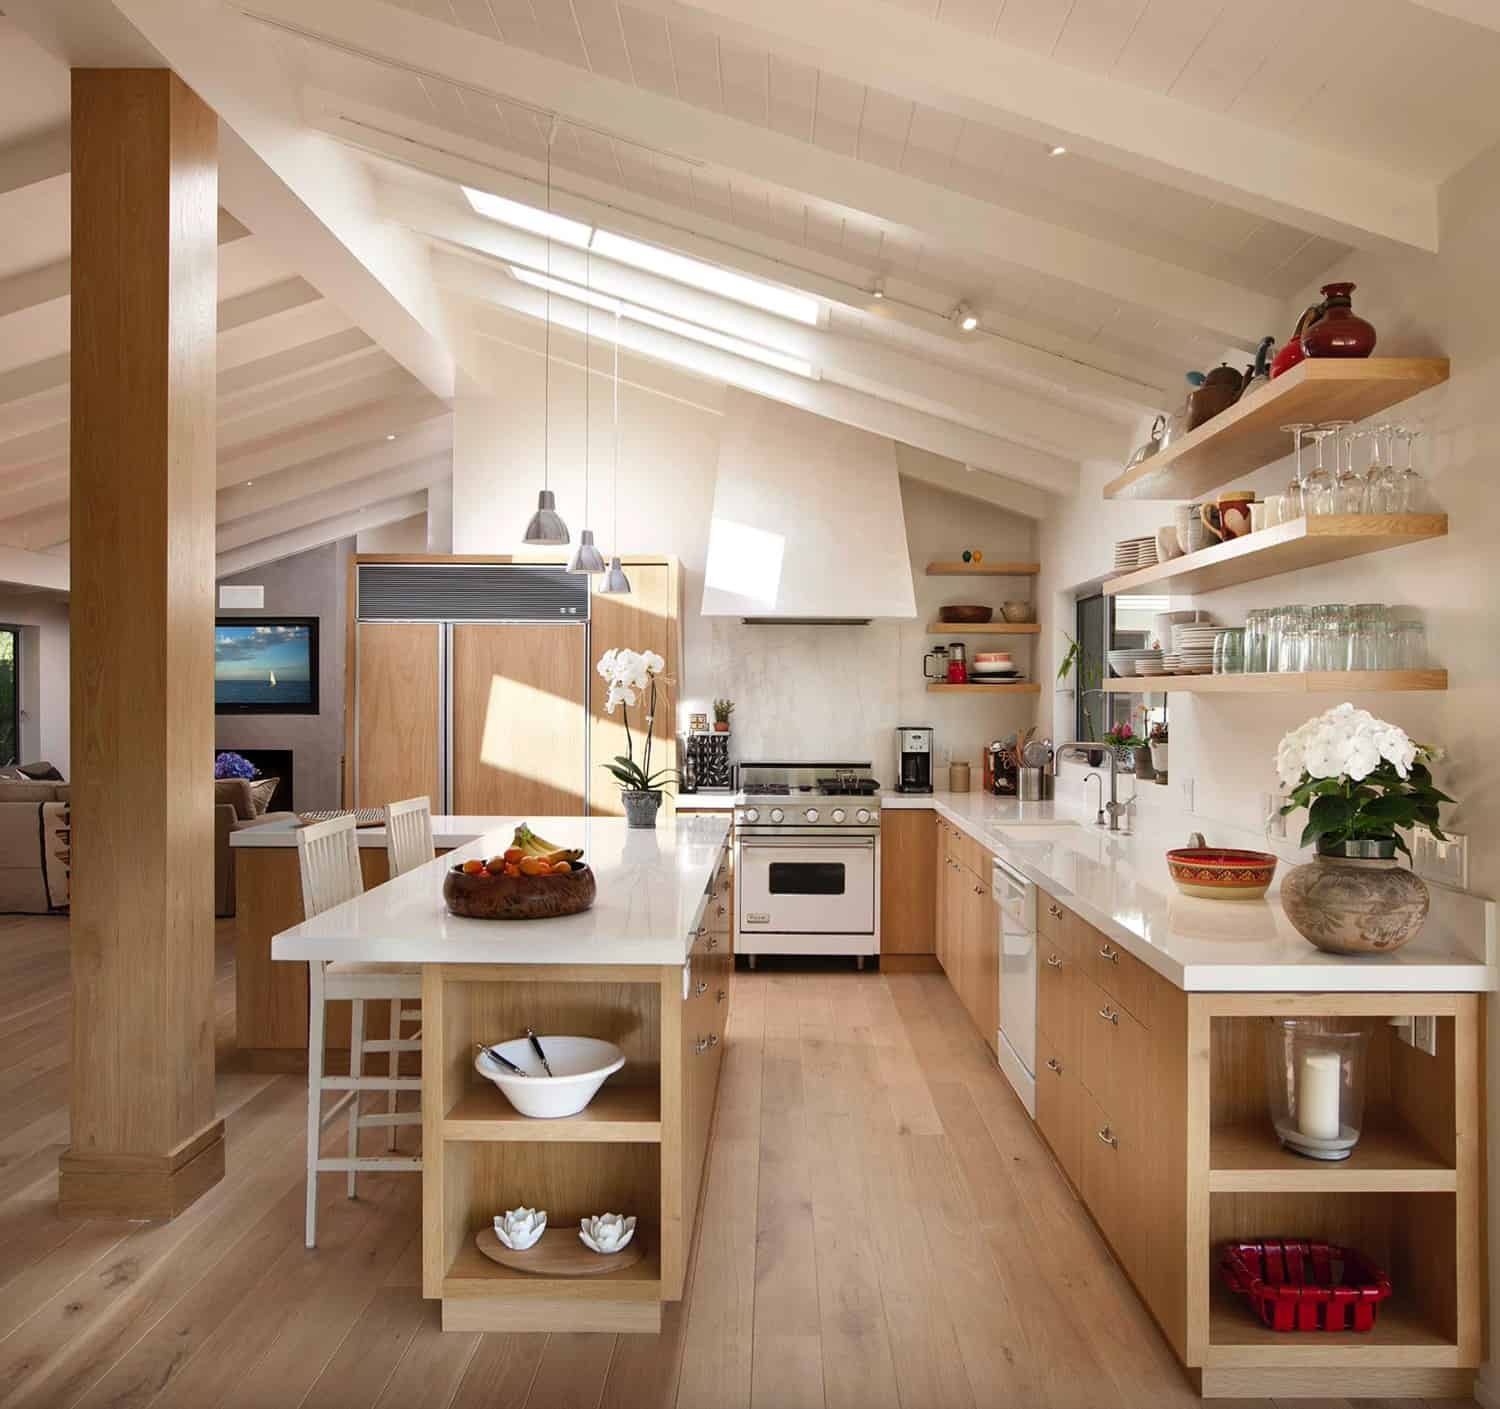 https://foter.com/photos/424/kitchen-in-white-and-light-wood-finishes.jpg